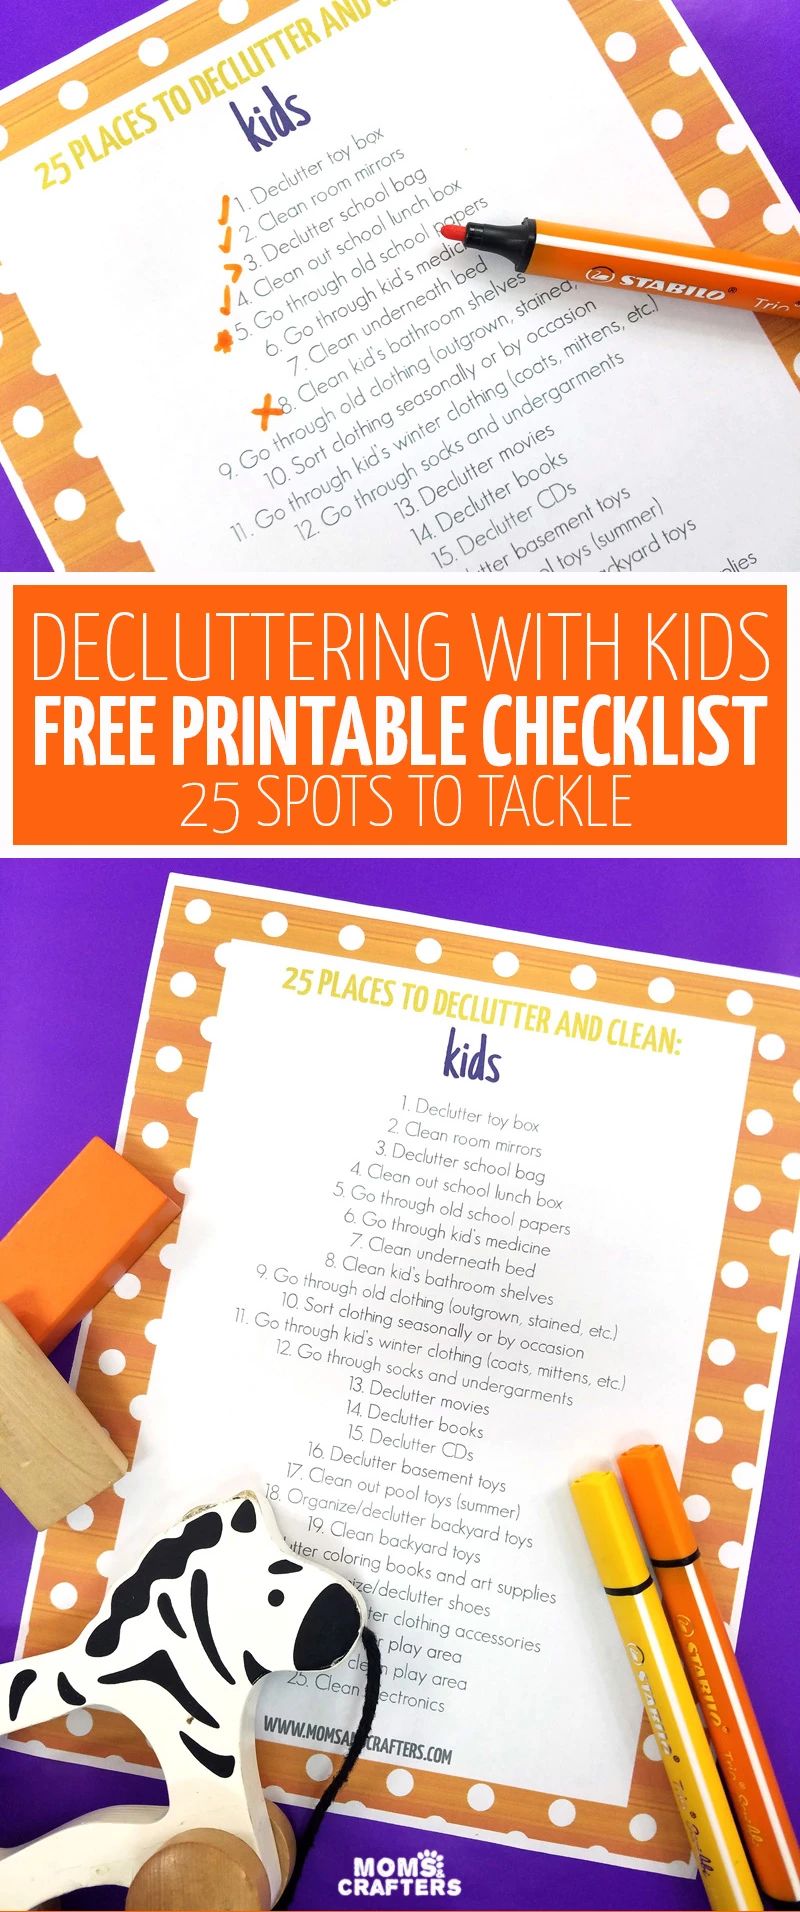 Ducluttering with kids is made simple with this easy to use organization checklist featuring 25 places to declutter and clean with children. You'll love this free printable organizing list for getting your playroom, kids rooms, and more in order. #organization #decluttering #kids